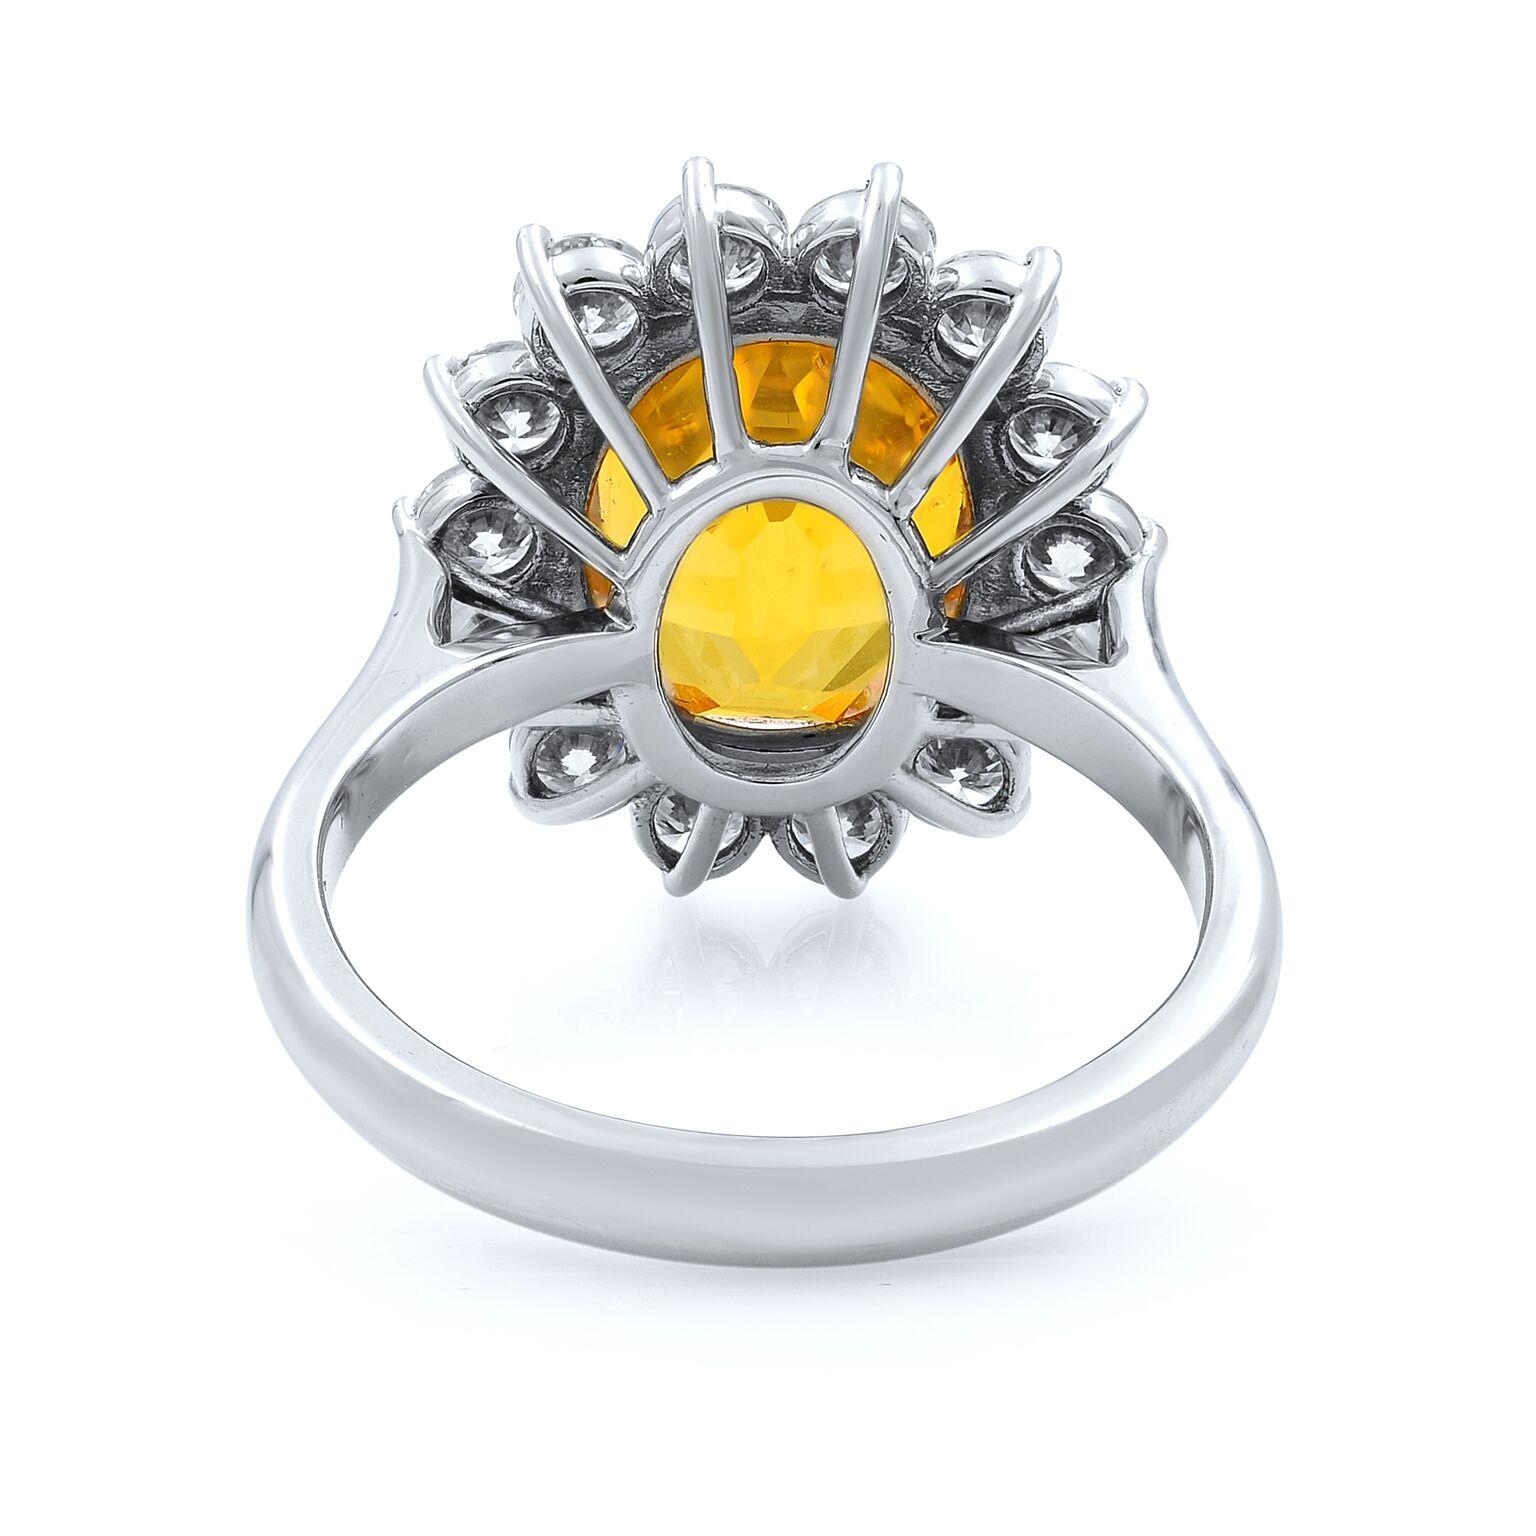 A beautiful oval yellow sapphire ring, halo set with round cut diamonds crafted in 18k white gold. Yellow sapphire weights 5.96cts. Comes with AGL certificate. Total carat weight 1.36cts. Ring Size: 7. Very classic and elegant. Presentable gift box